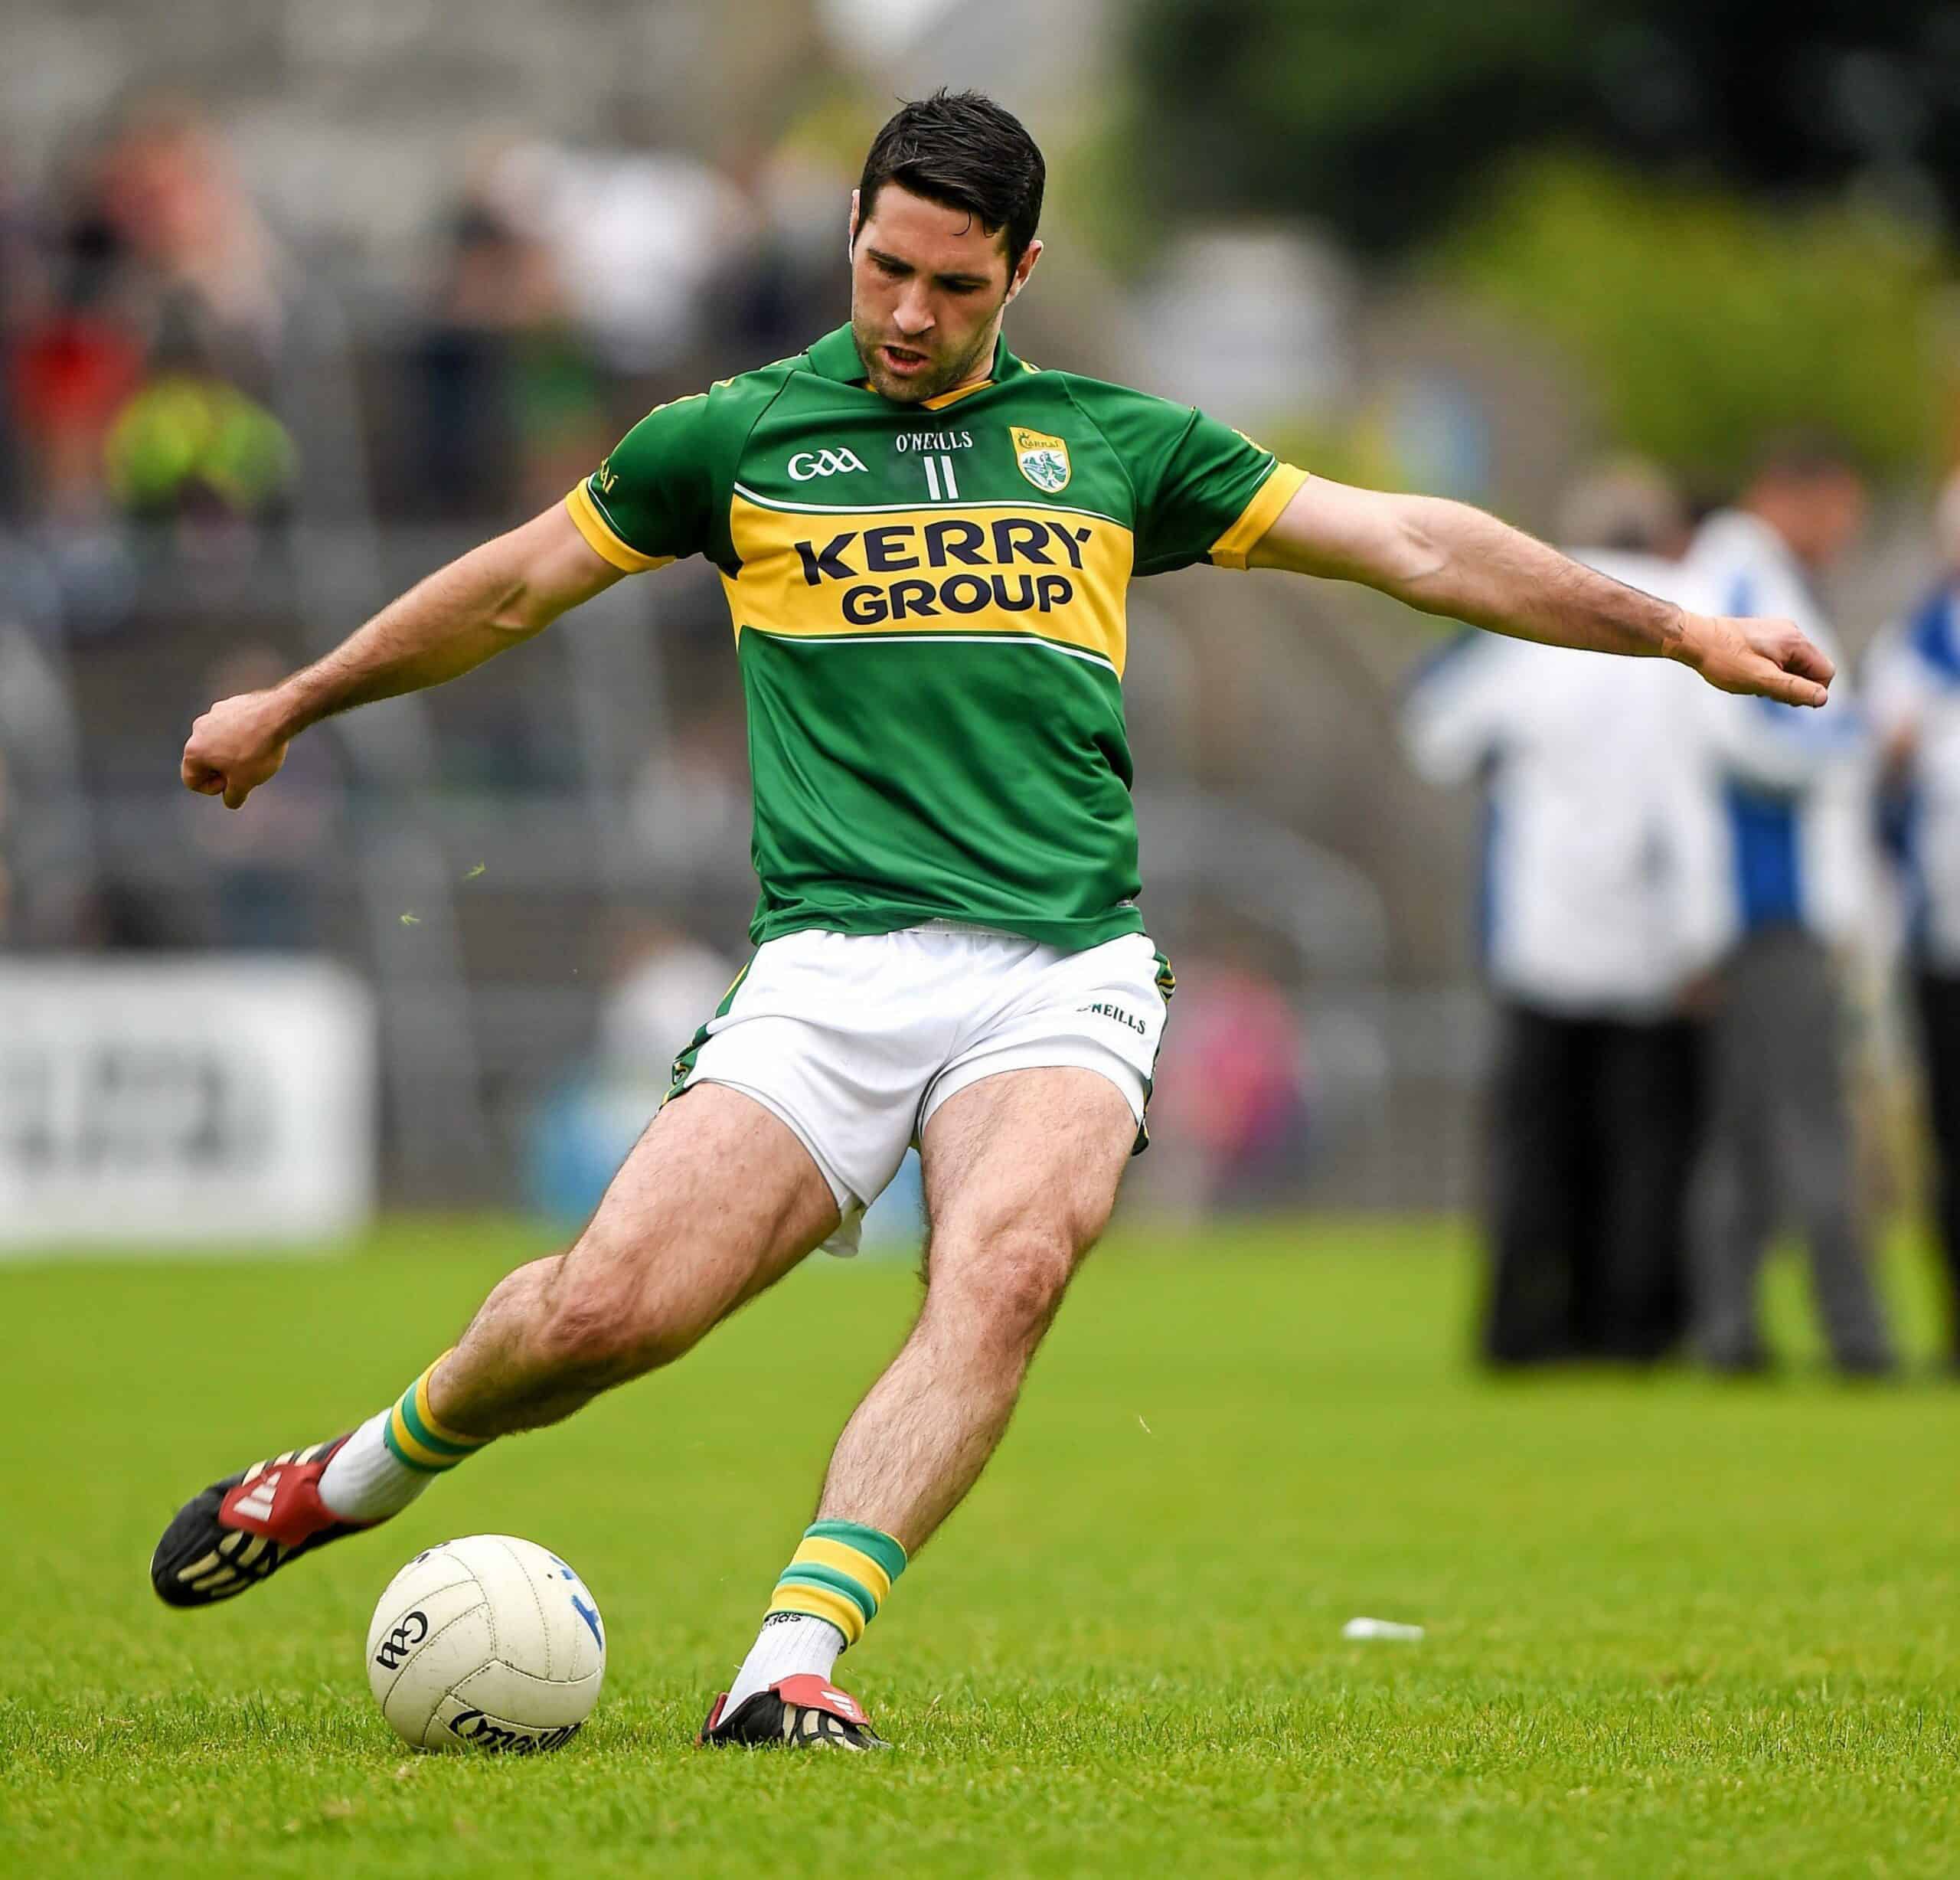 Bryan Sheehan nominated to be the new Kerry Captain